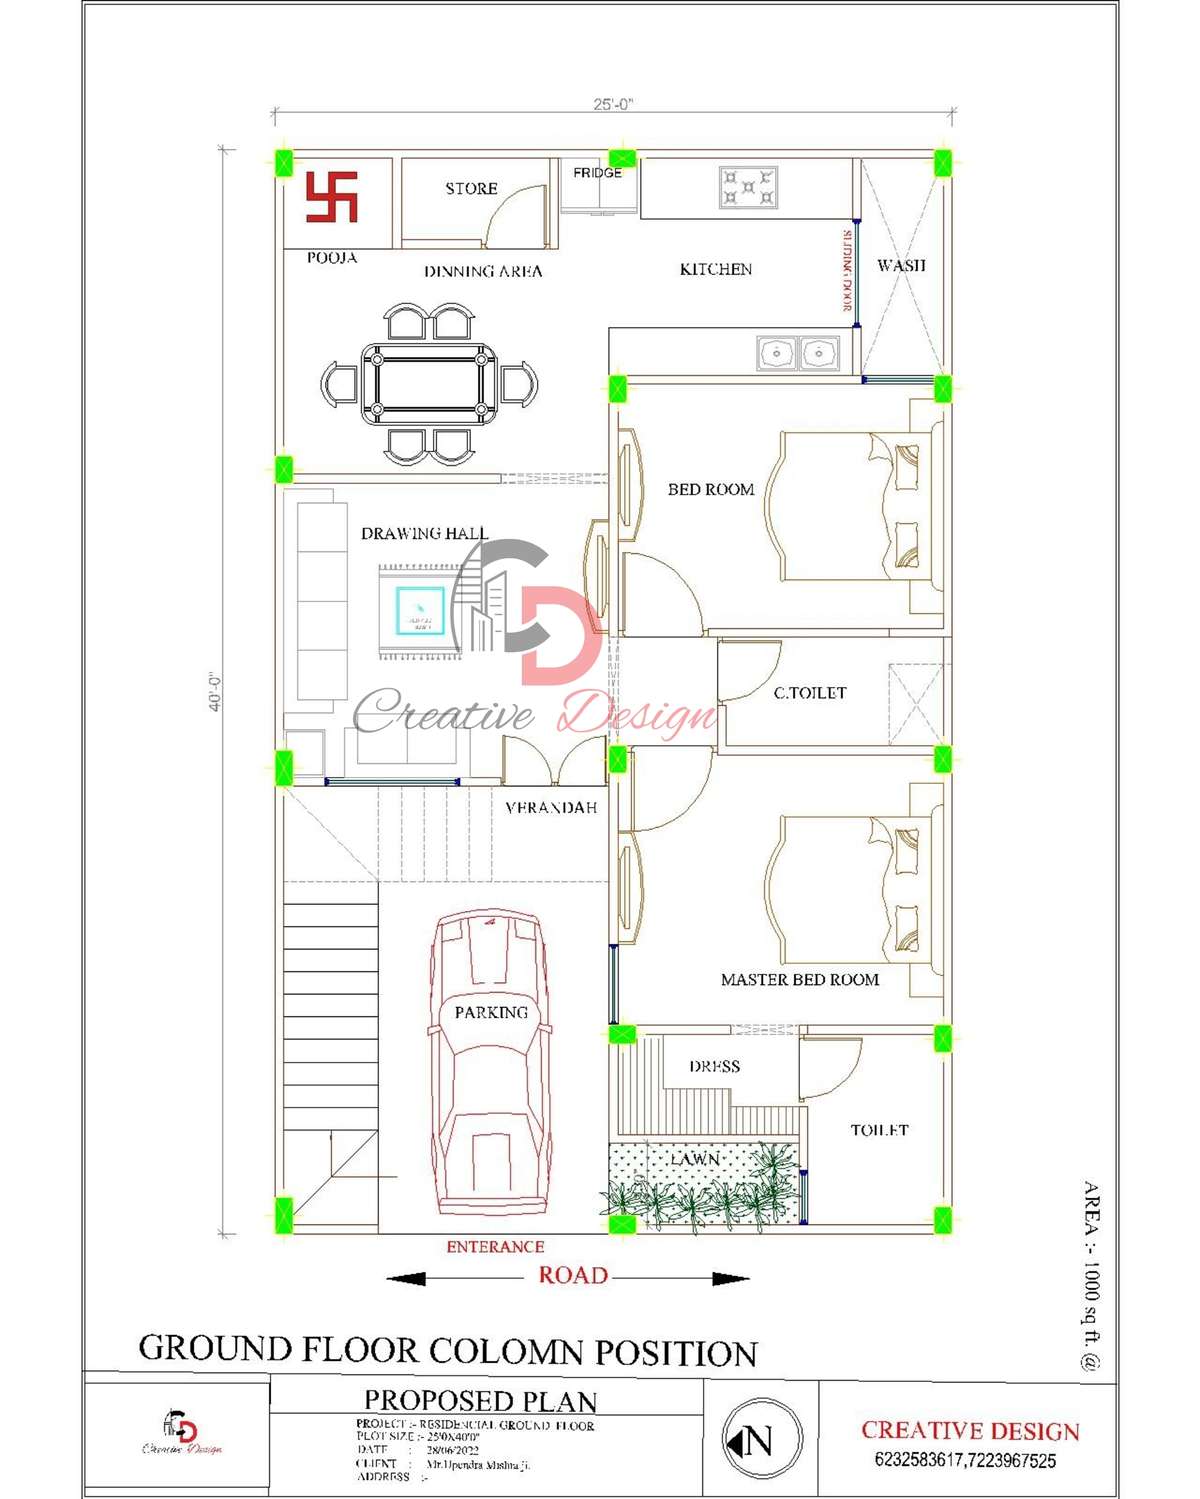 25×40ft ground floor plan.
Contact CREATIVE DESIGN on 6232583617.
For ARCHITECTURAL(floor plan,3D Elevation,etc),STRUCTURAL(colom,beam designs,etc) & INTERIORE DESIGN.
At a very affordable prices & better services.
.
.
.
.
.
 . 
.
#floorplan #architecture #realestate #design #interiordesign #d #floorplans #home #architect #homedesign #interior #newhome #house #dreamhome #autocad #render #realtor #rendering #o #construction #architecturelovers #dfloorplan #realestateagent #homedecor